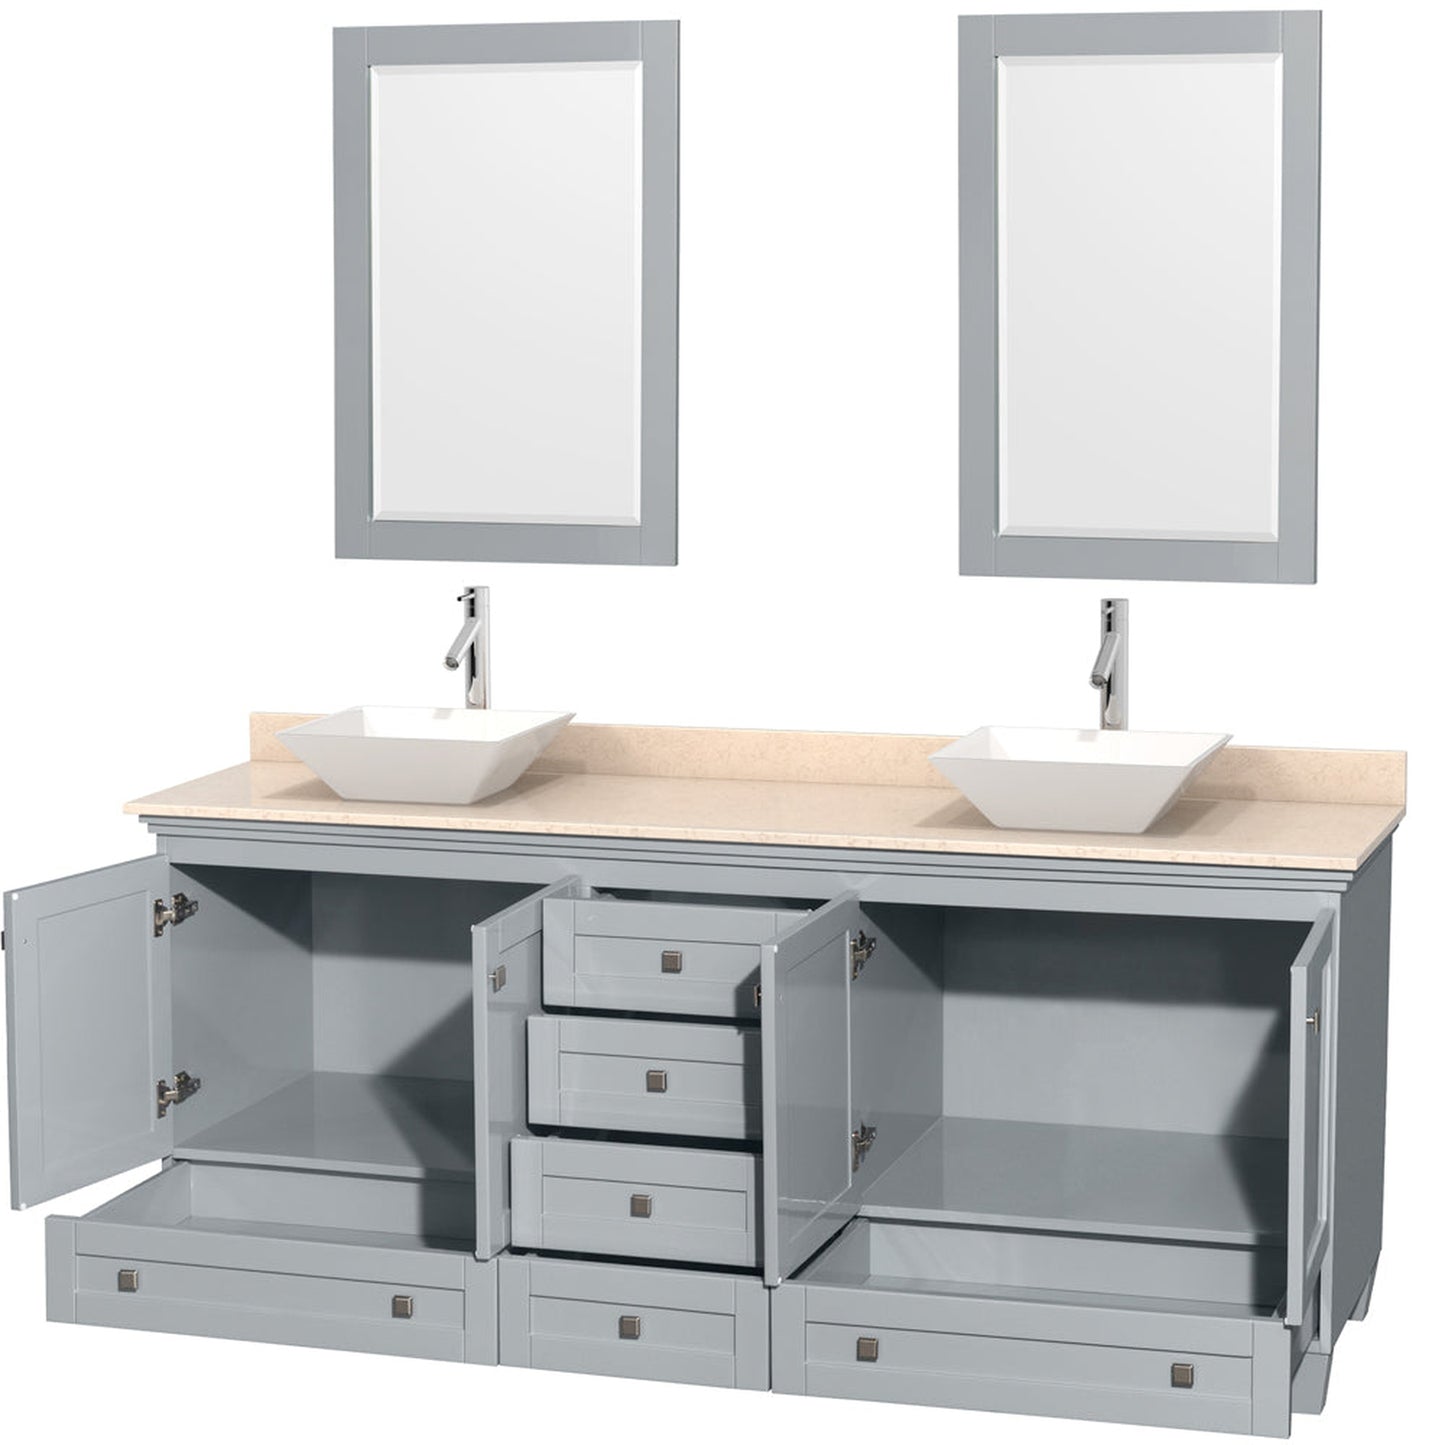 Wyndham Collection Acclaim 80" Double Bathroom Vanity in Oyster Gray With Ivory Marble Countertop, Pyra White Porcelain Sink & 24" Mirror